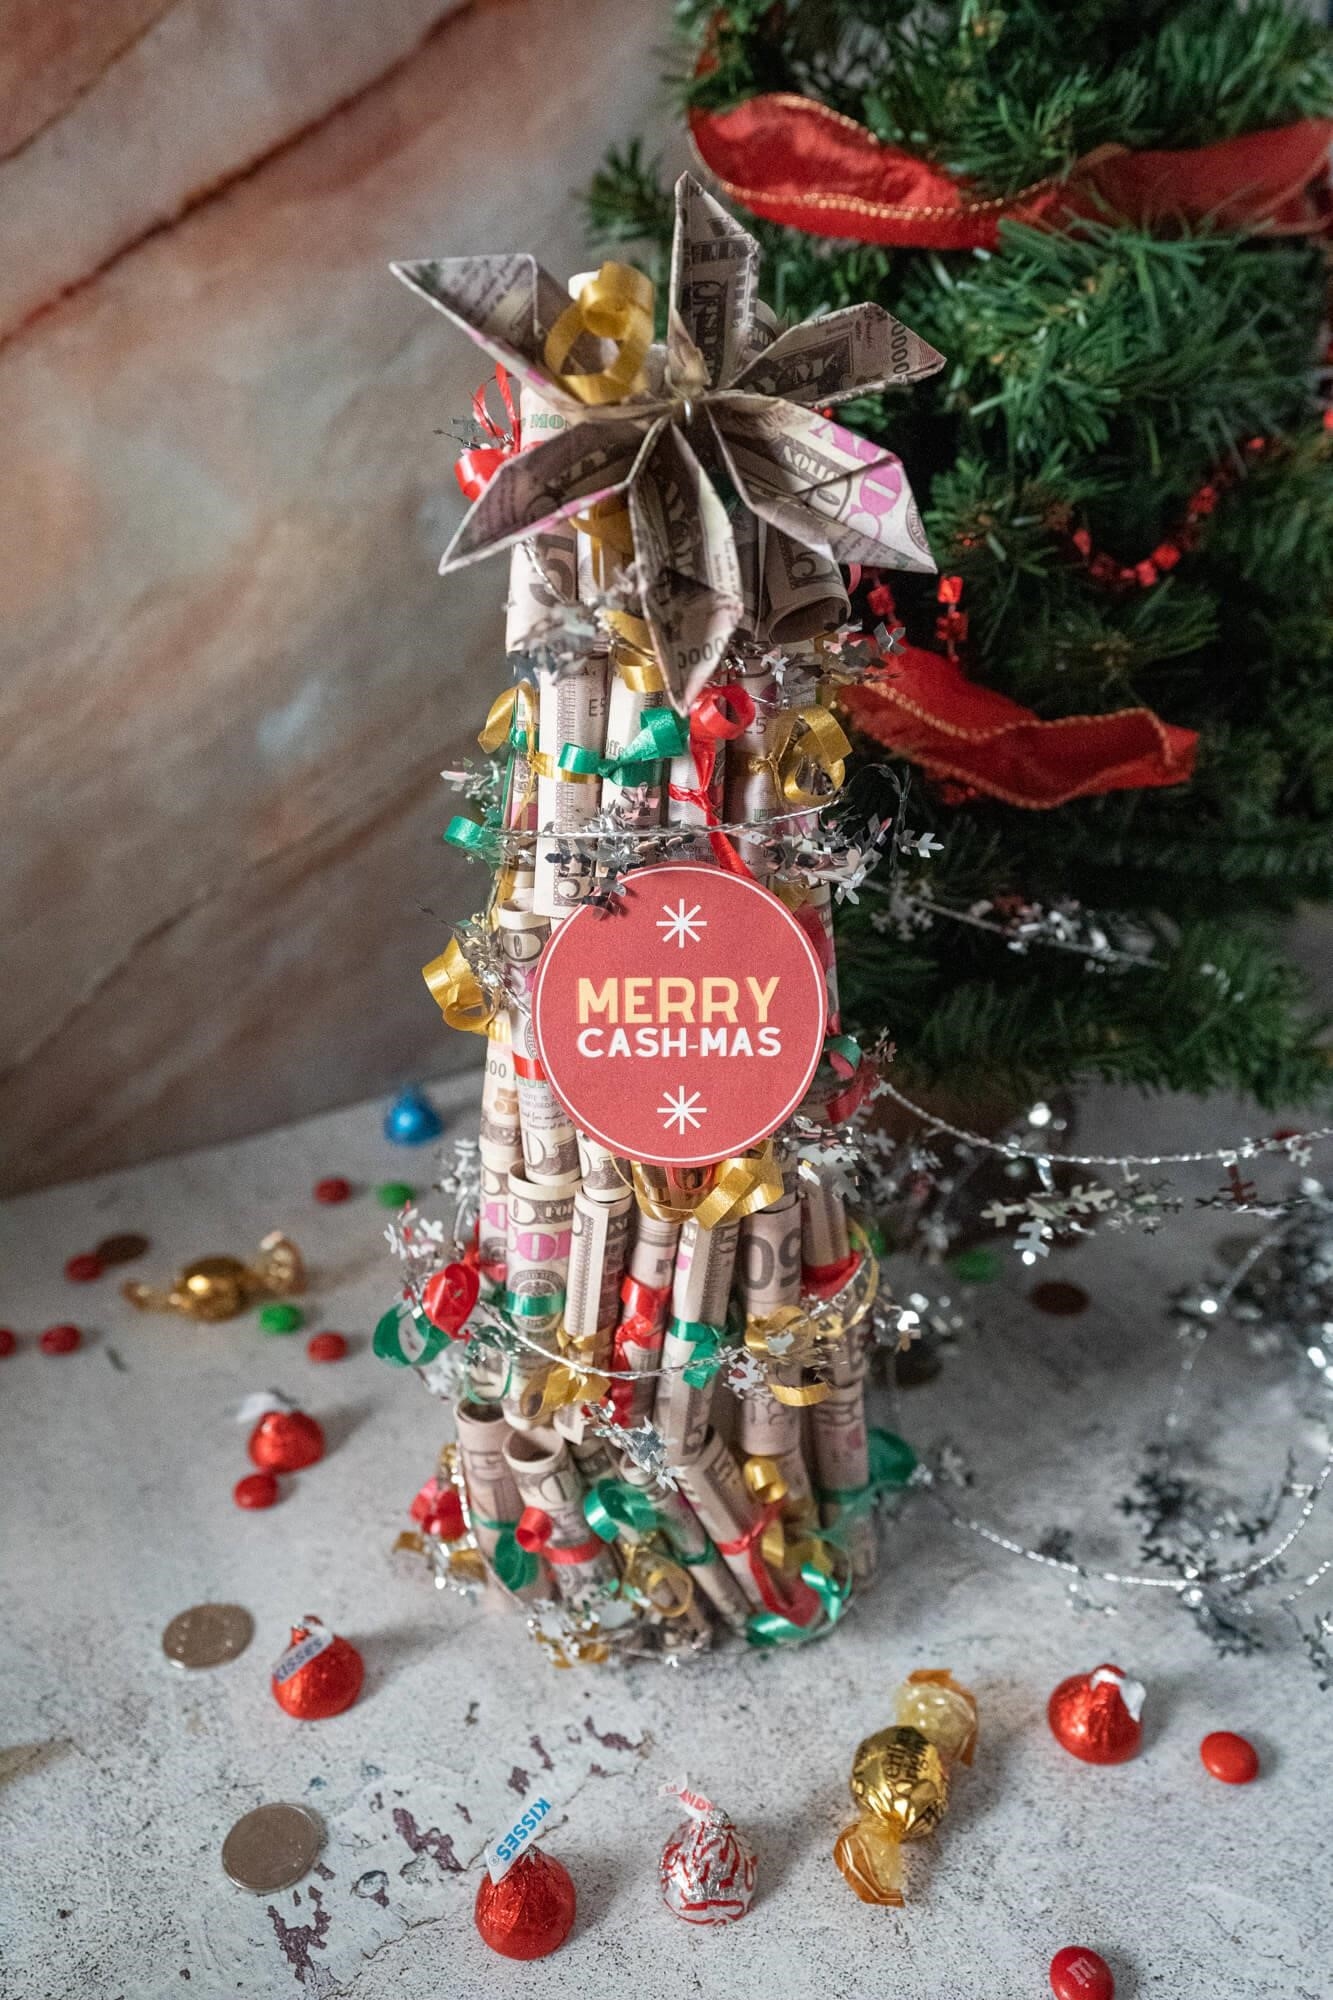 Step by Step Guide: Creating a Christmas Money Tree